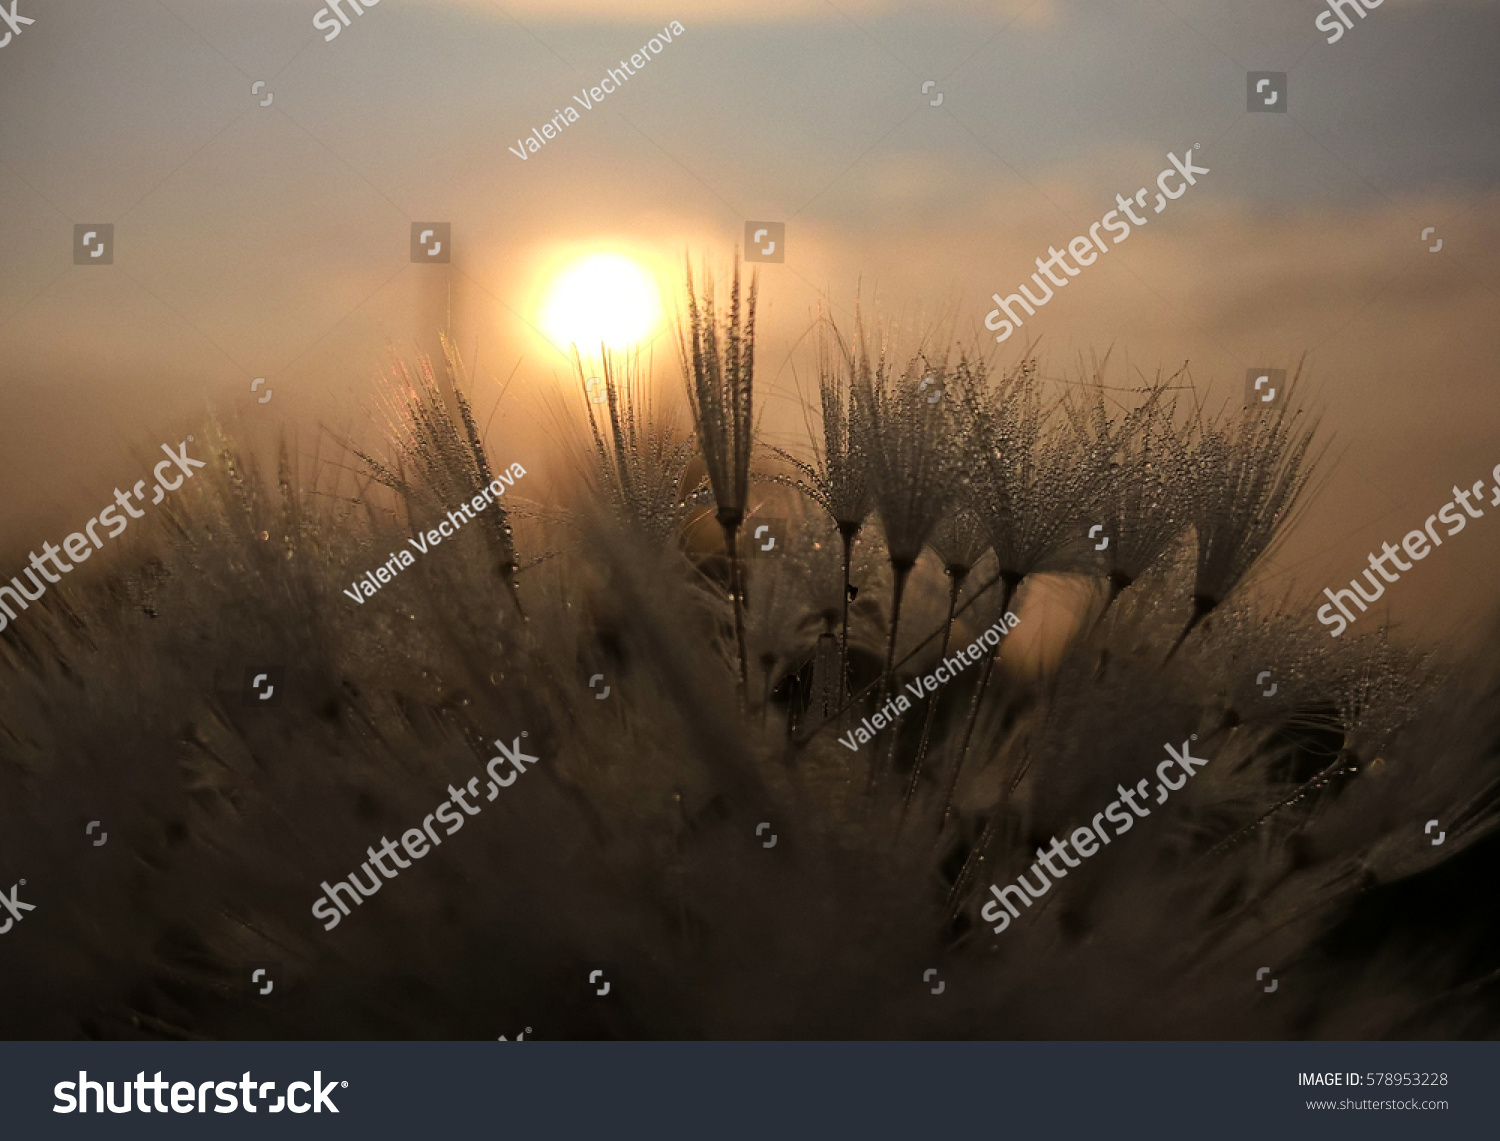 Dandelion during sunrise and sunset with dew. Slovakia #578953228